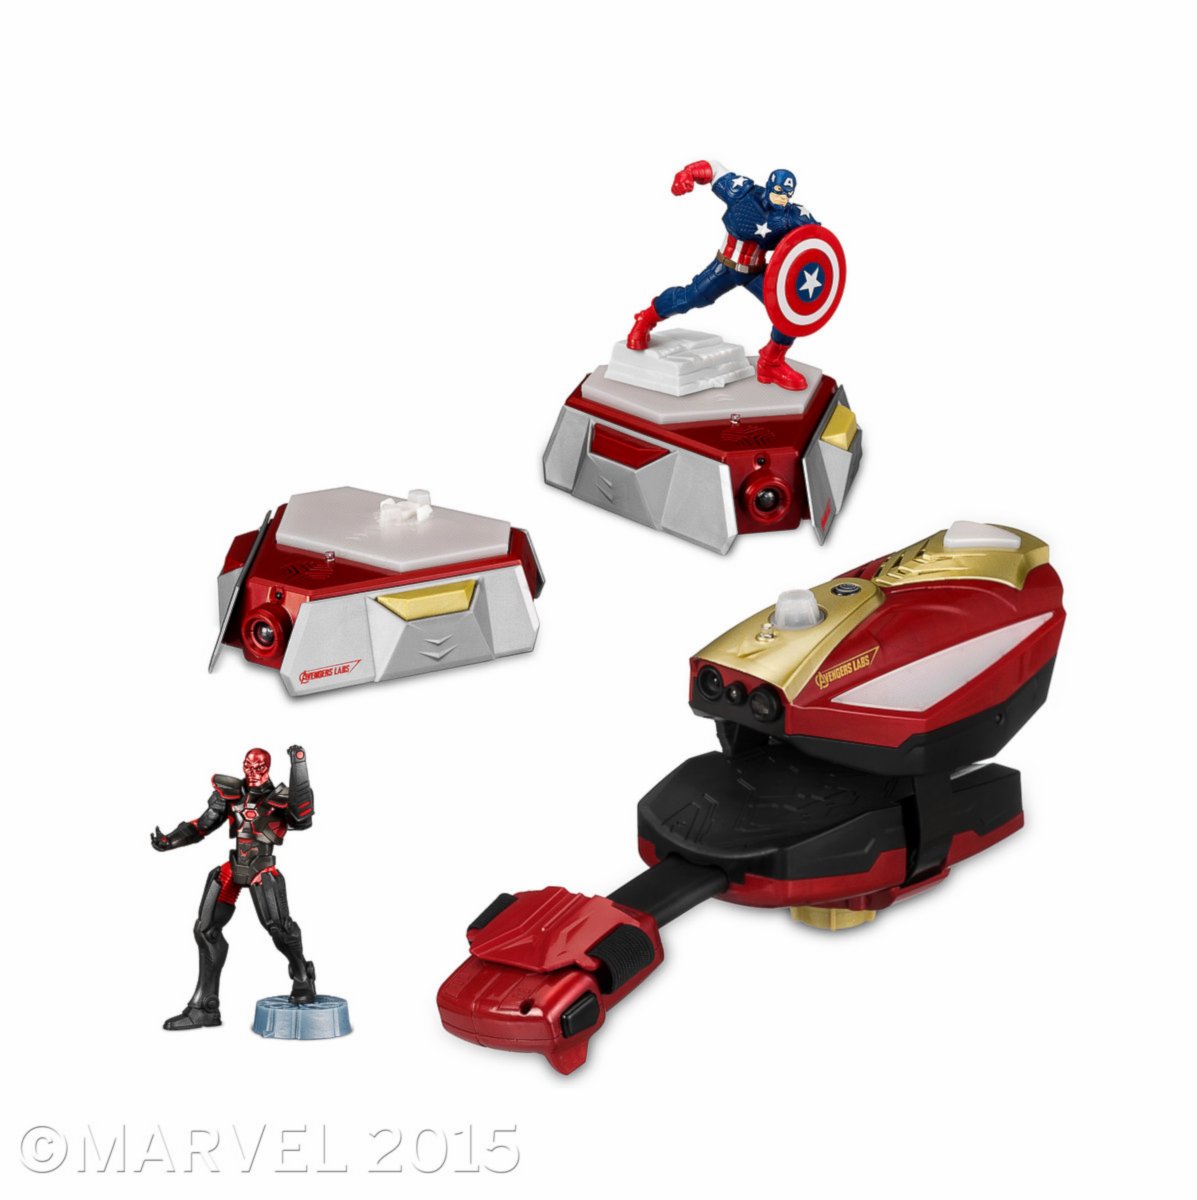 PHOTO: Habro's Playmation Avengers Starter pack lands on the list of top holiday toys.